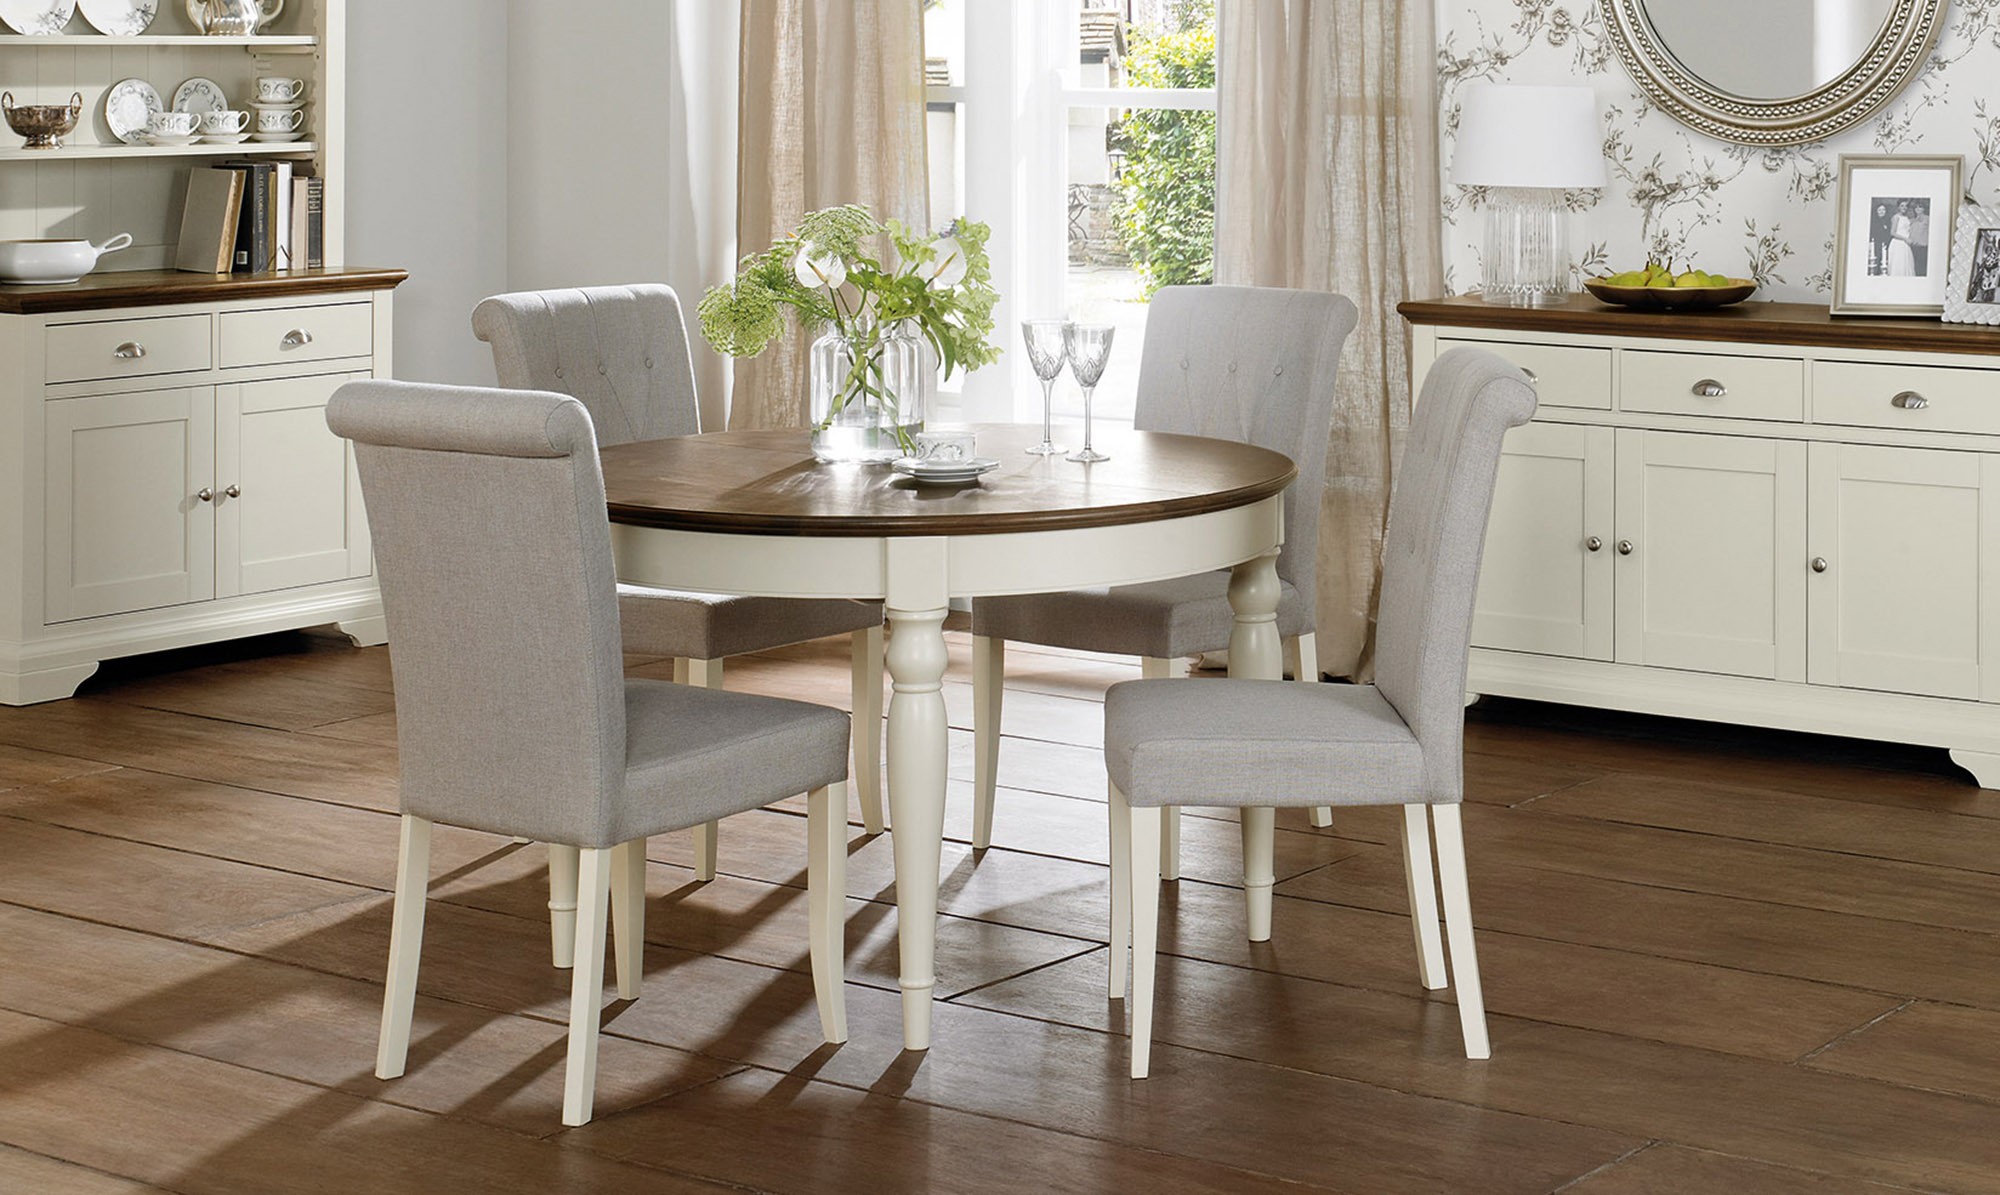 modern classic dining room furniture photo - 9